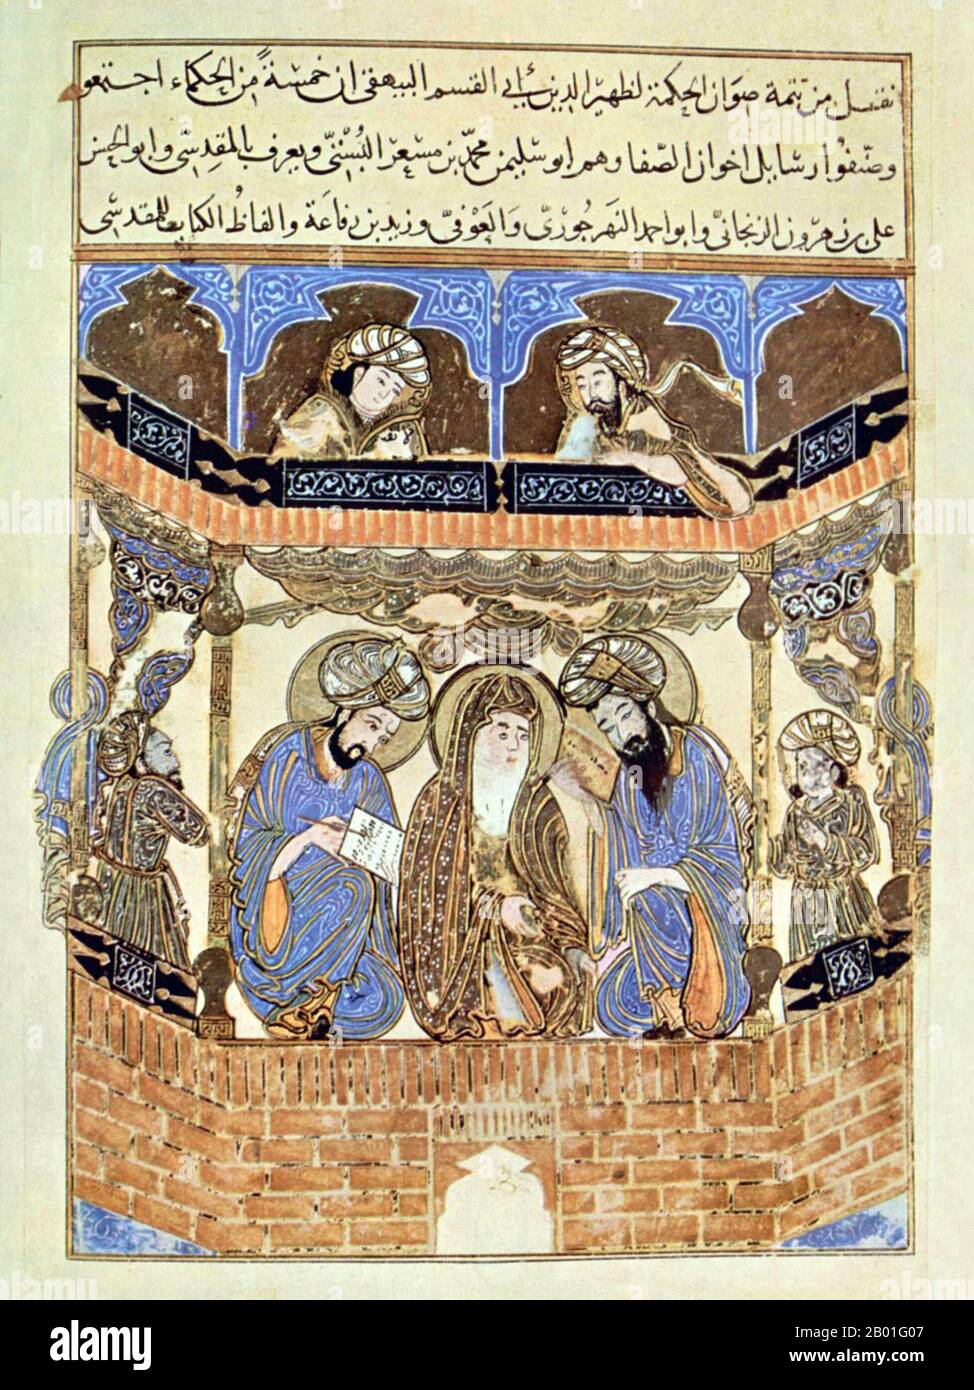 Iraq: Authors and attendants. Frontispiece from the Epistles of the Sincere Brethren, Baghdad, 1287.  The Brethren of Purity (Arabic: اخوان الصفا; transliteration: Ikhwan al-Safa; also in English: The Brethren of Sincerity) were a secret society of Muslim philosophers in Basra, Iraq, in the 10th century CE.  The structure of this mysterious organisation and the identities of its members have never been clear. Their esoteric teachings and philosophy are expounded in an epistolary style in the Encyclopedia of the Brethren of Purity ('Rasa'il Ikhwan al-safa'), a giant compendium of 52 epistles. Stock Photo